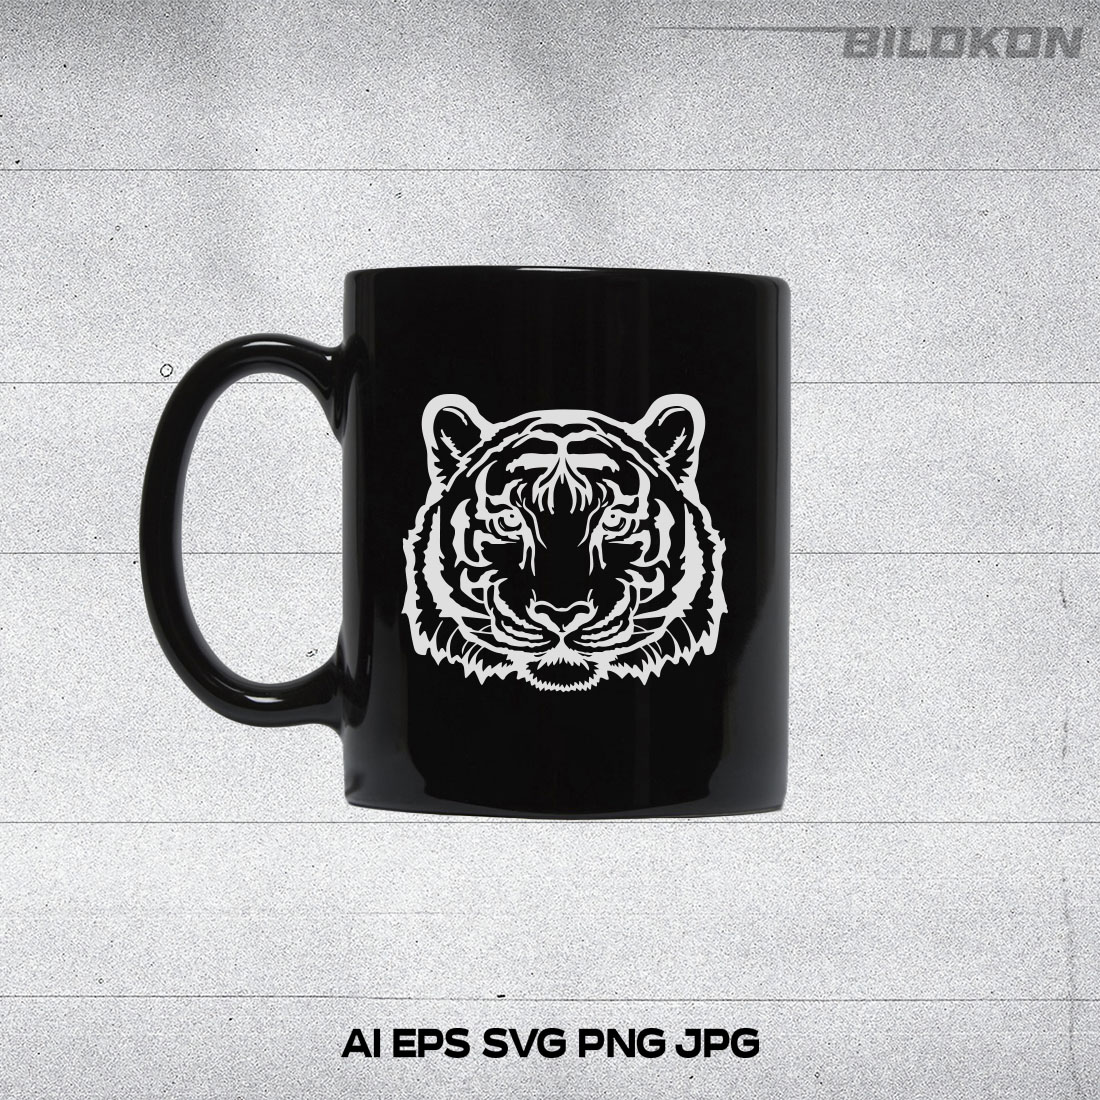 Black coffee mug with a white tiger on it.